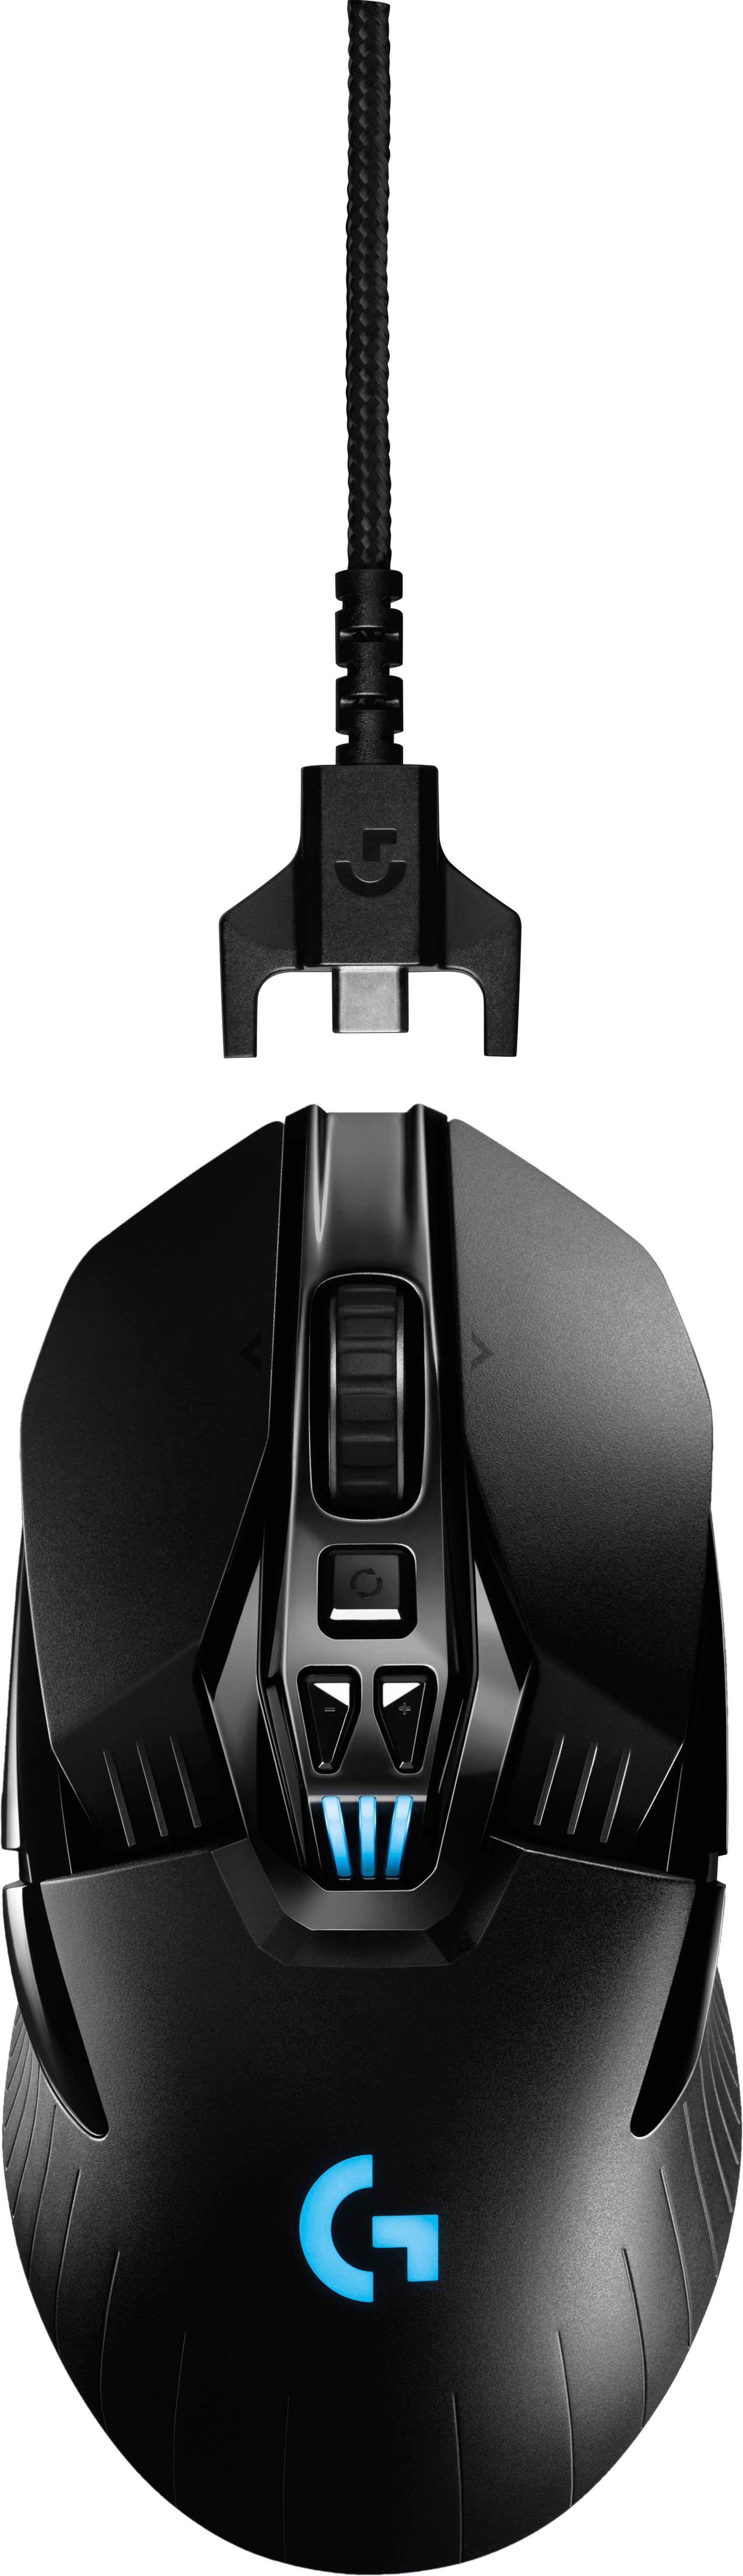 Logitech Optical Gaming Ambidextrous Mouse with RGB Lighting Black 910-005670 - Buy